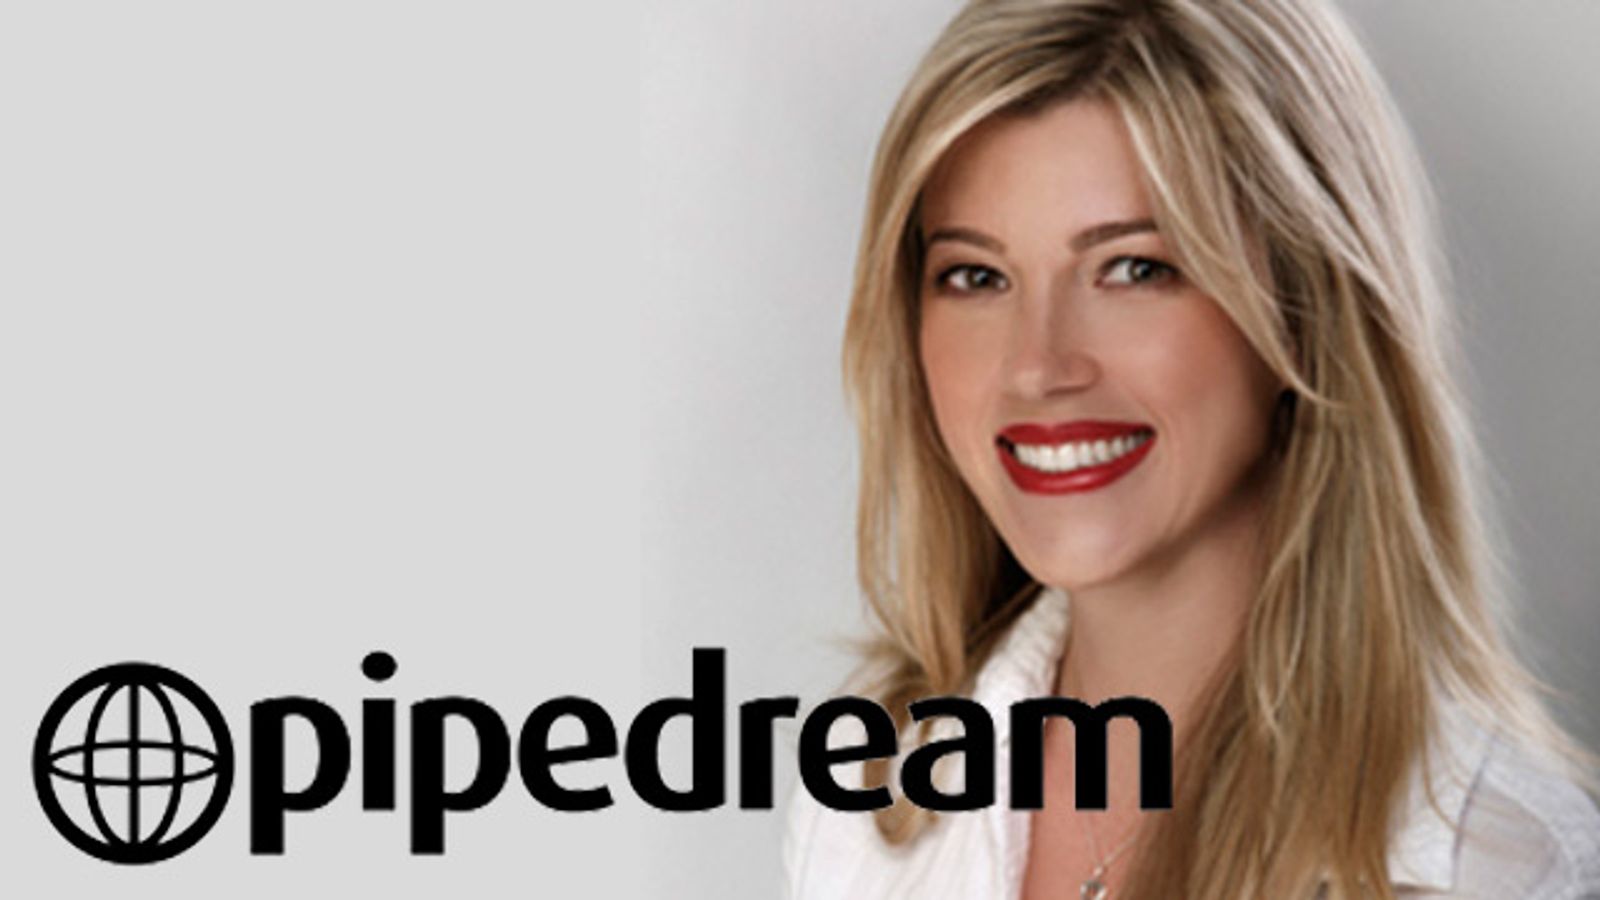 Pipedream’s Dream Team Continues to Expand